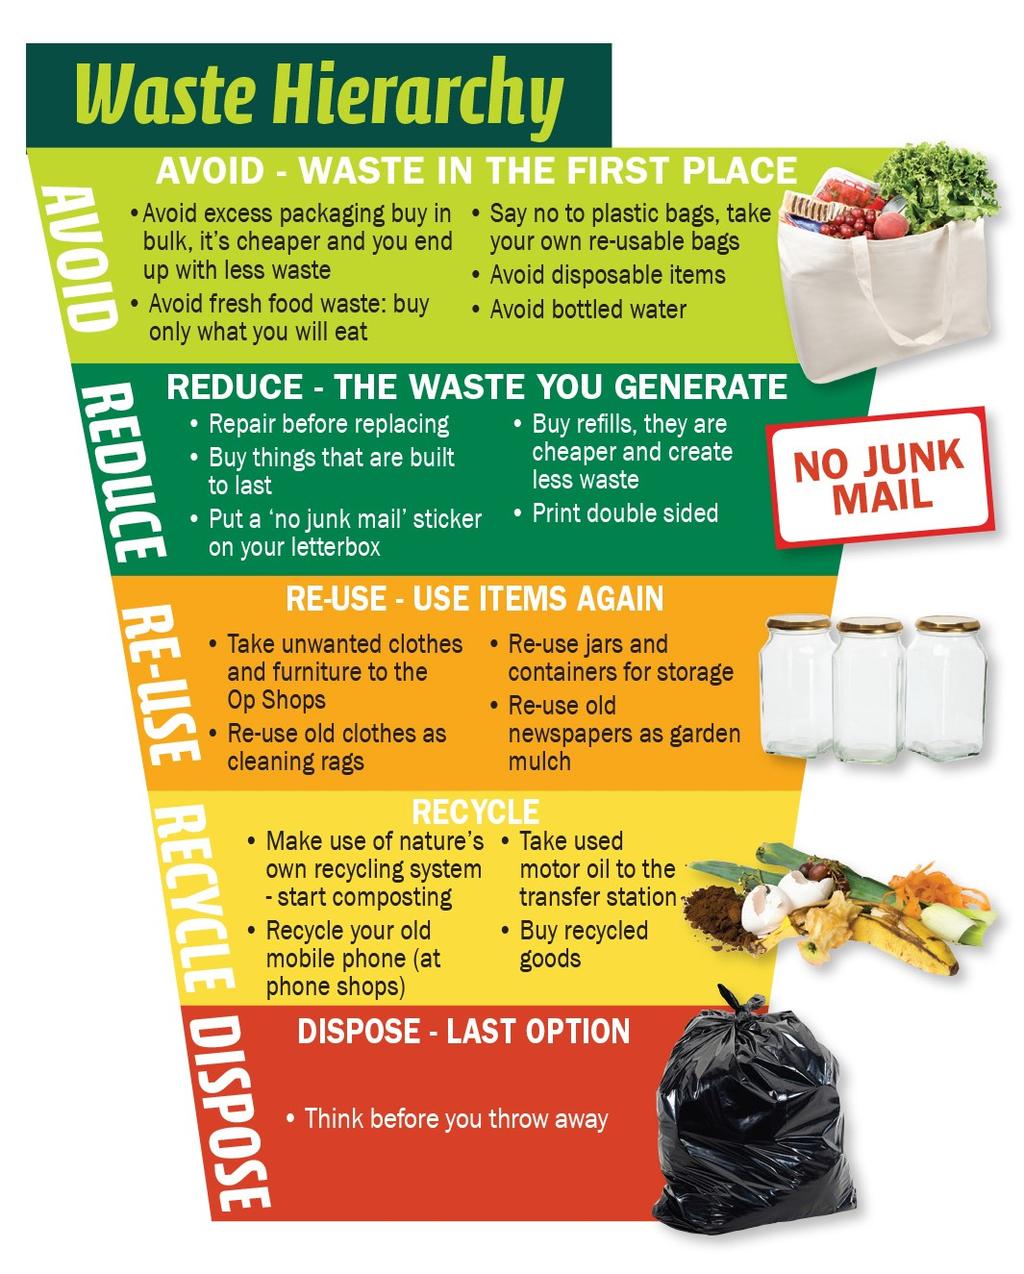 Please see Campaspe s Hazardous Waste info sheet for more information on correct disposal methods.